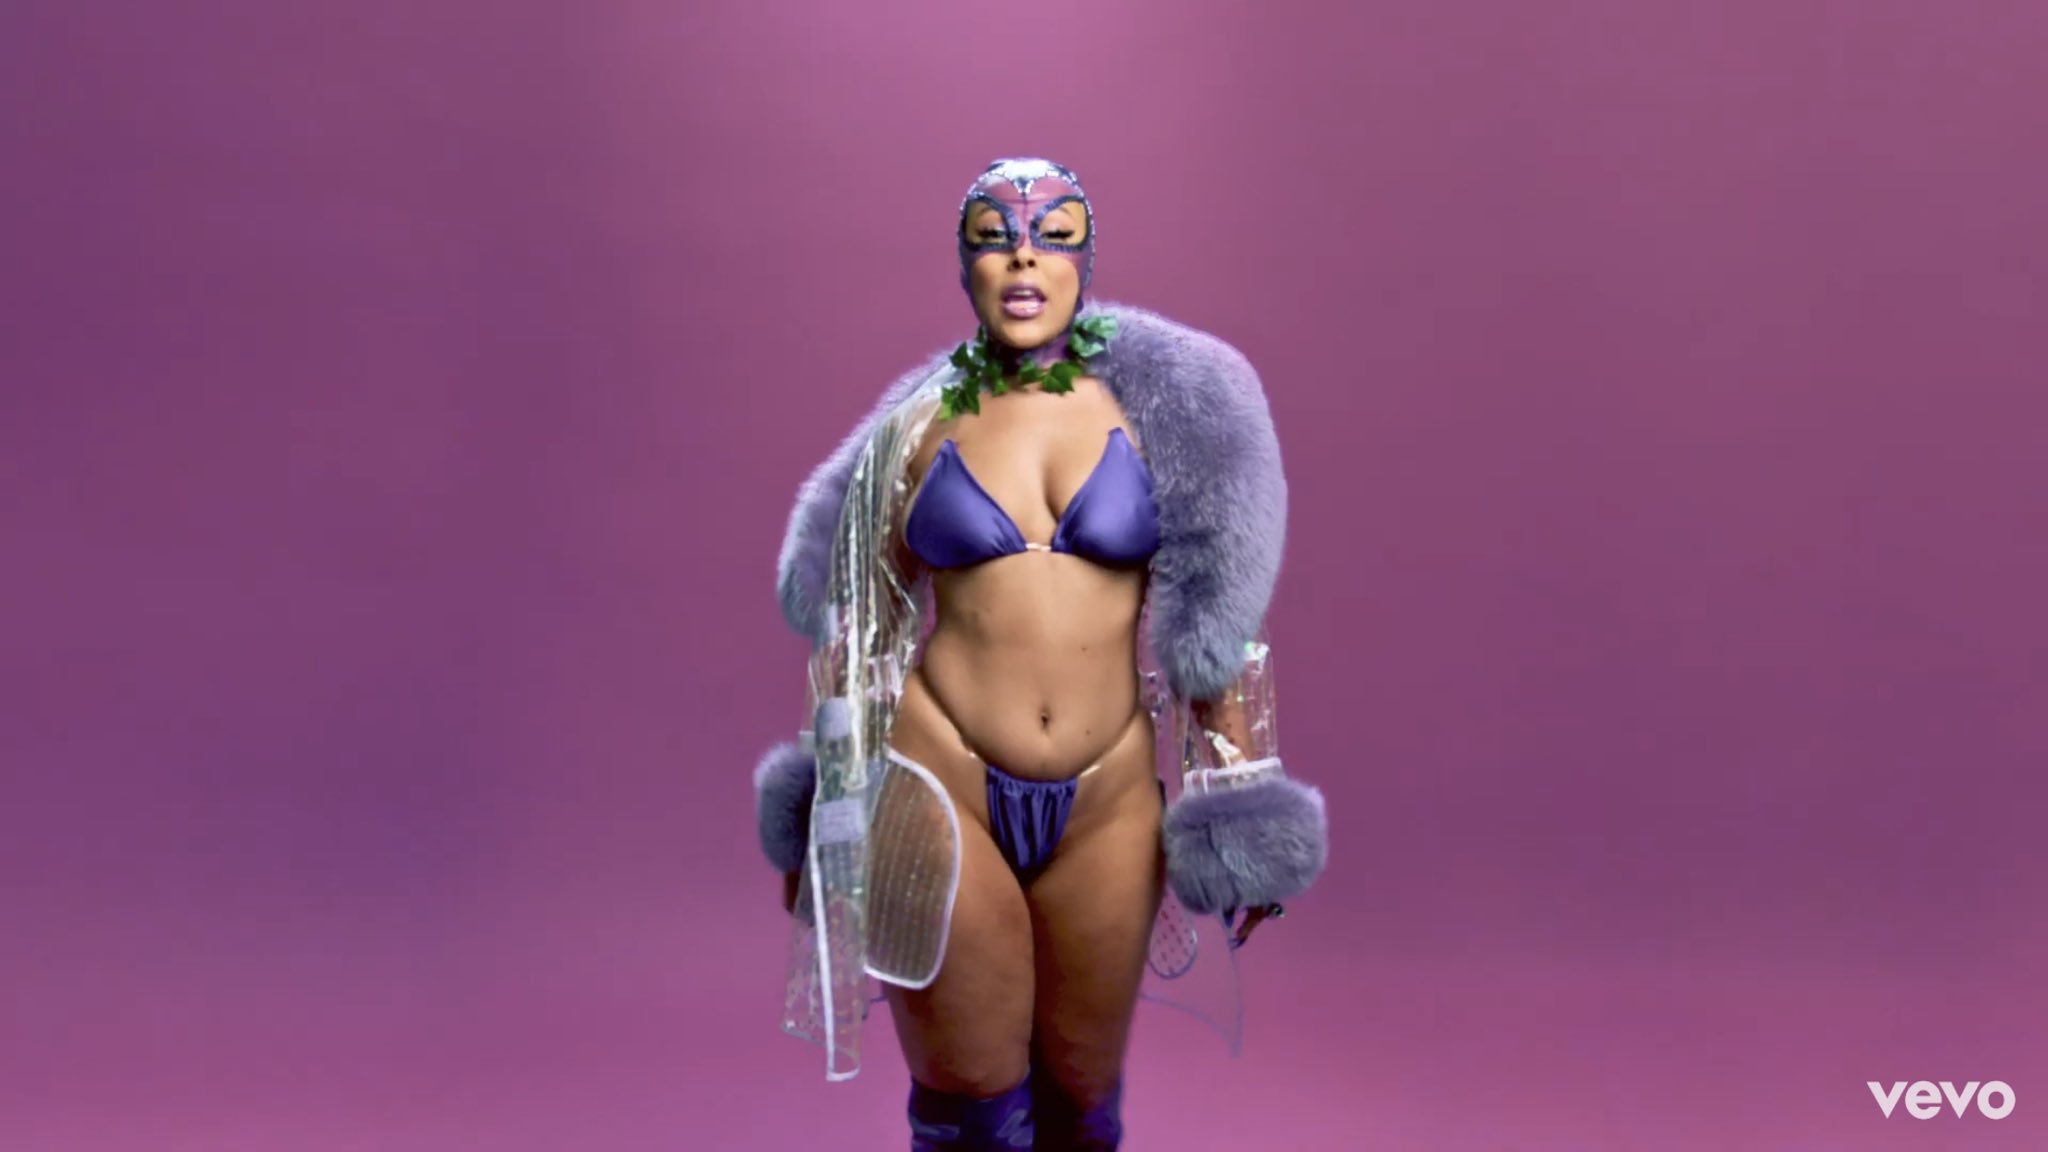 TONI TONE on Twitter: "Doja Cat came through with all that naturally c...